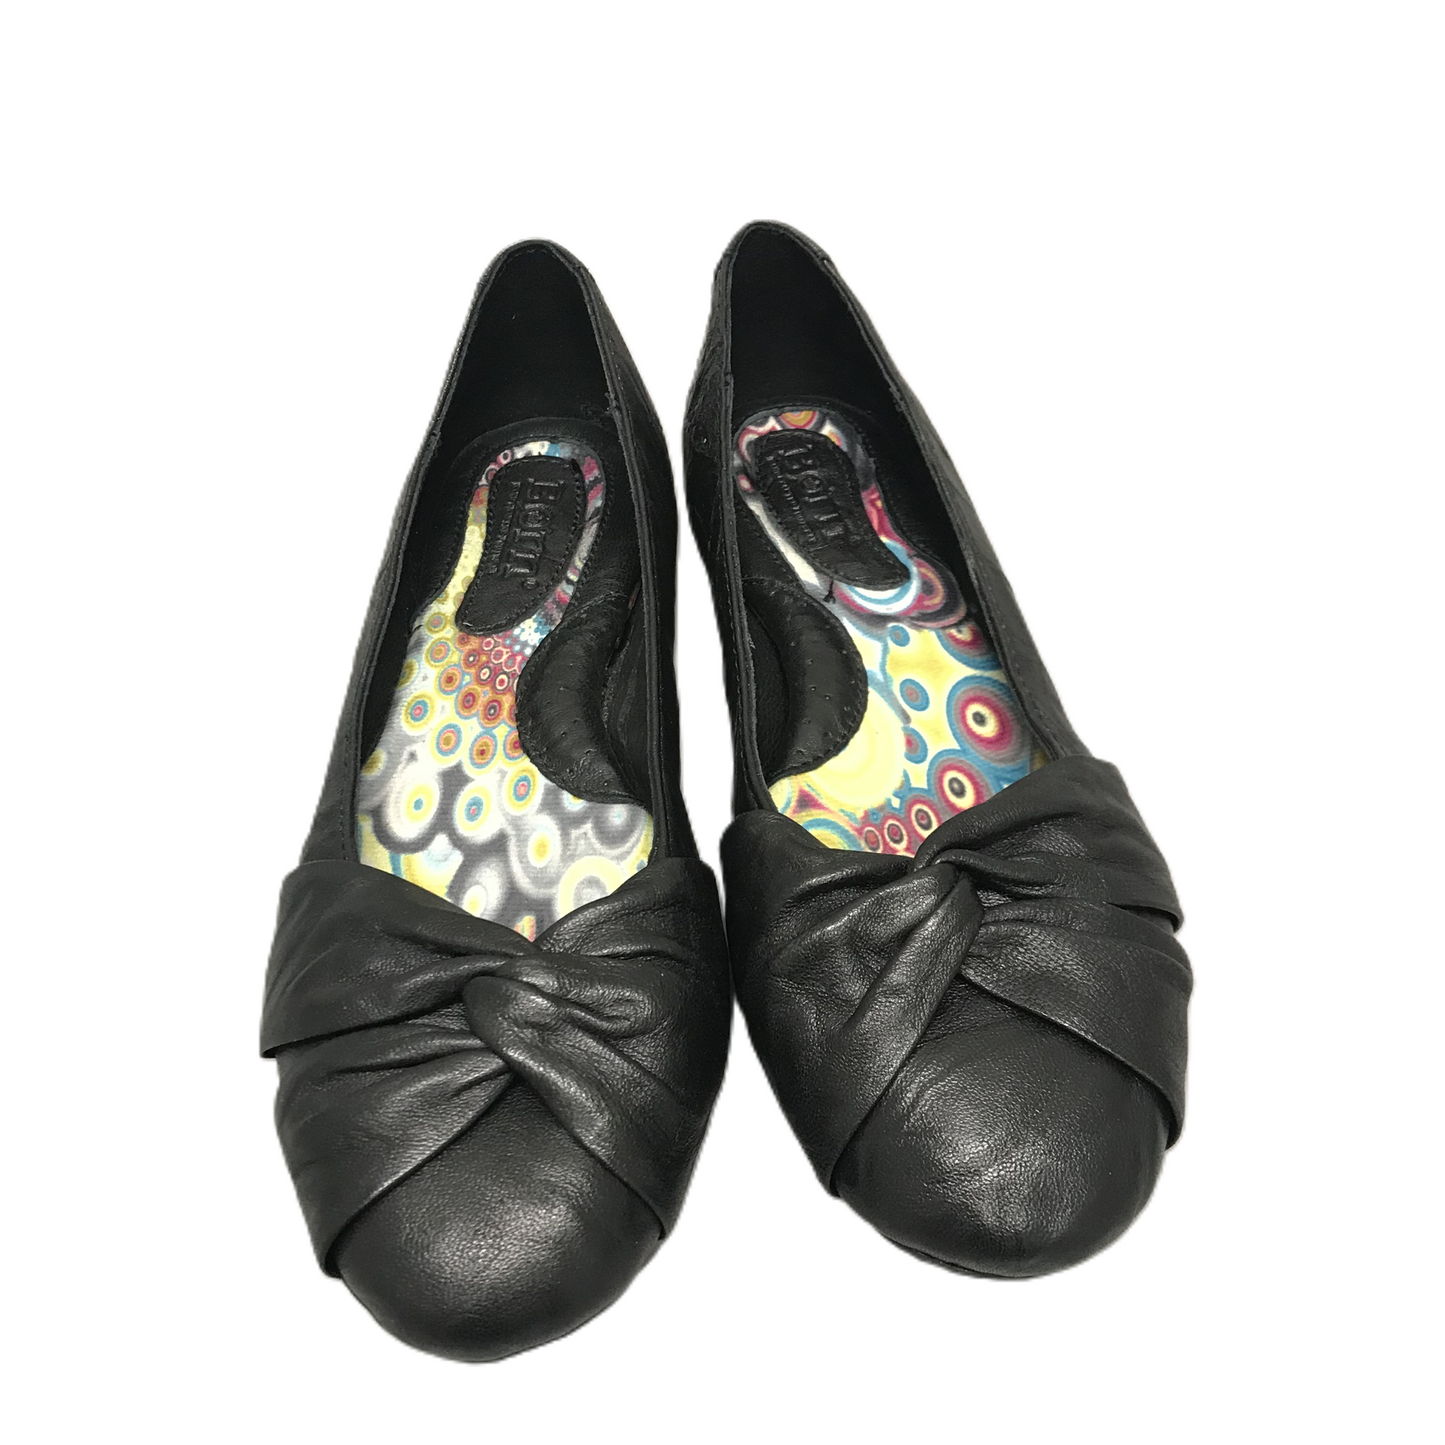 Black Shoes Flats By Born, Size: 7